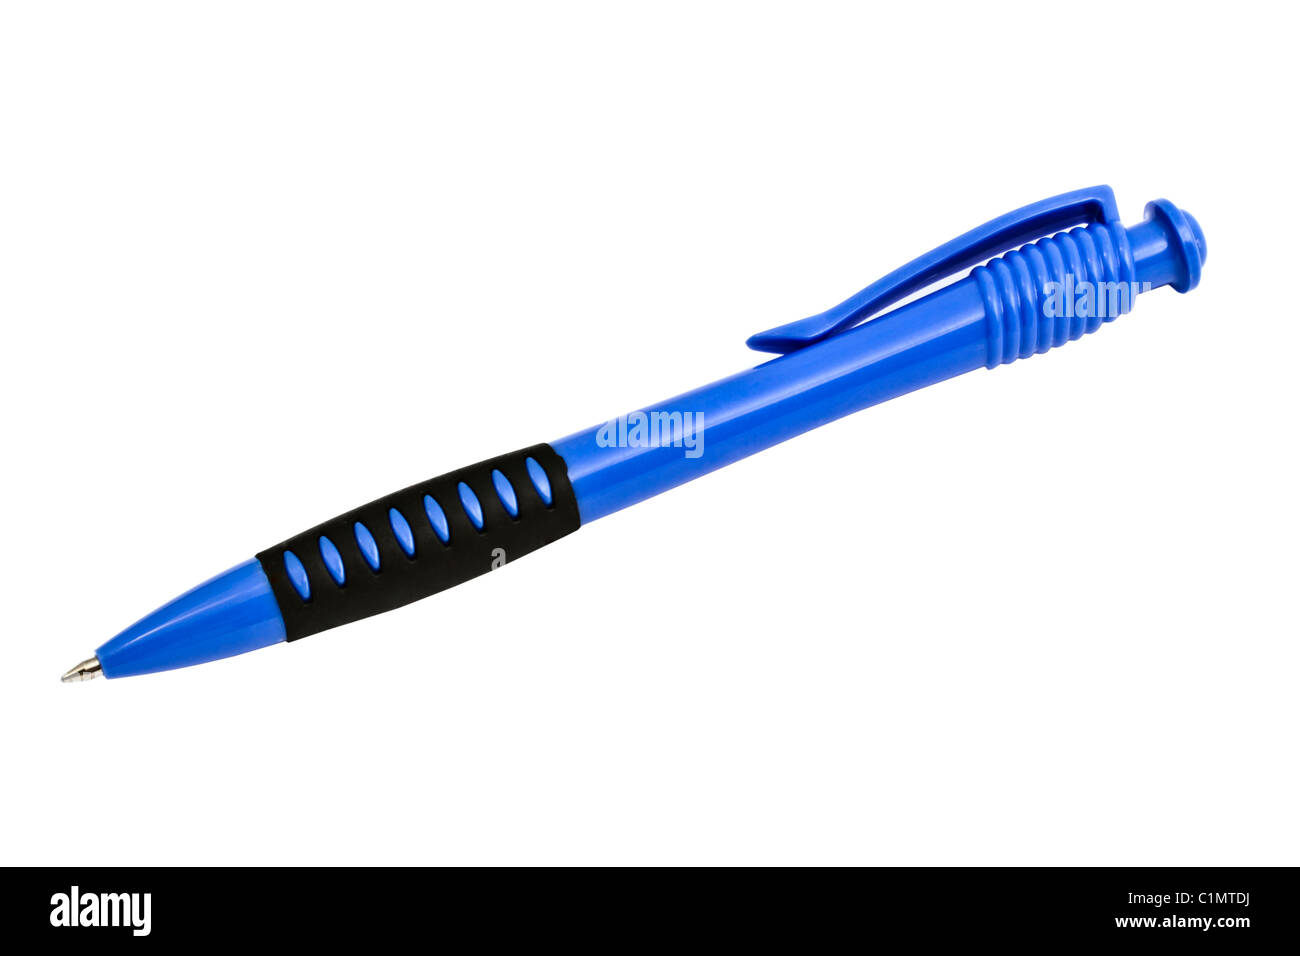 Blue Point Pen Isolated On White background Stock Photo